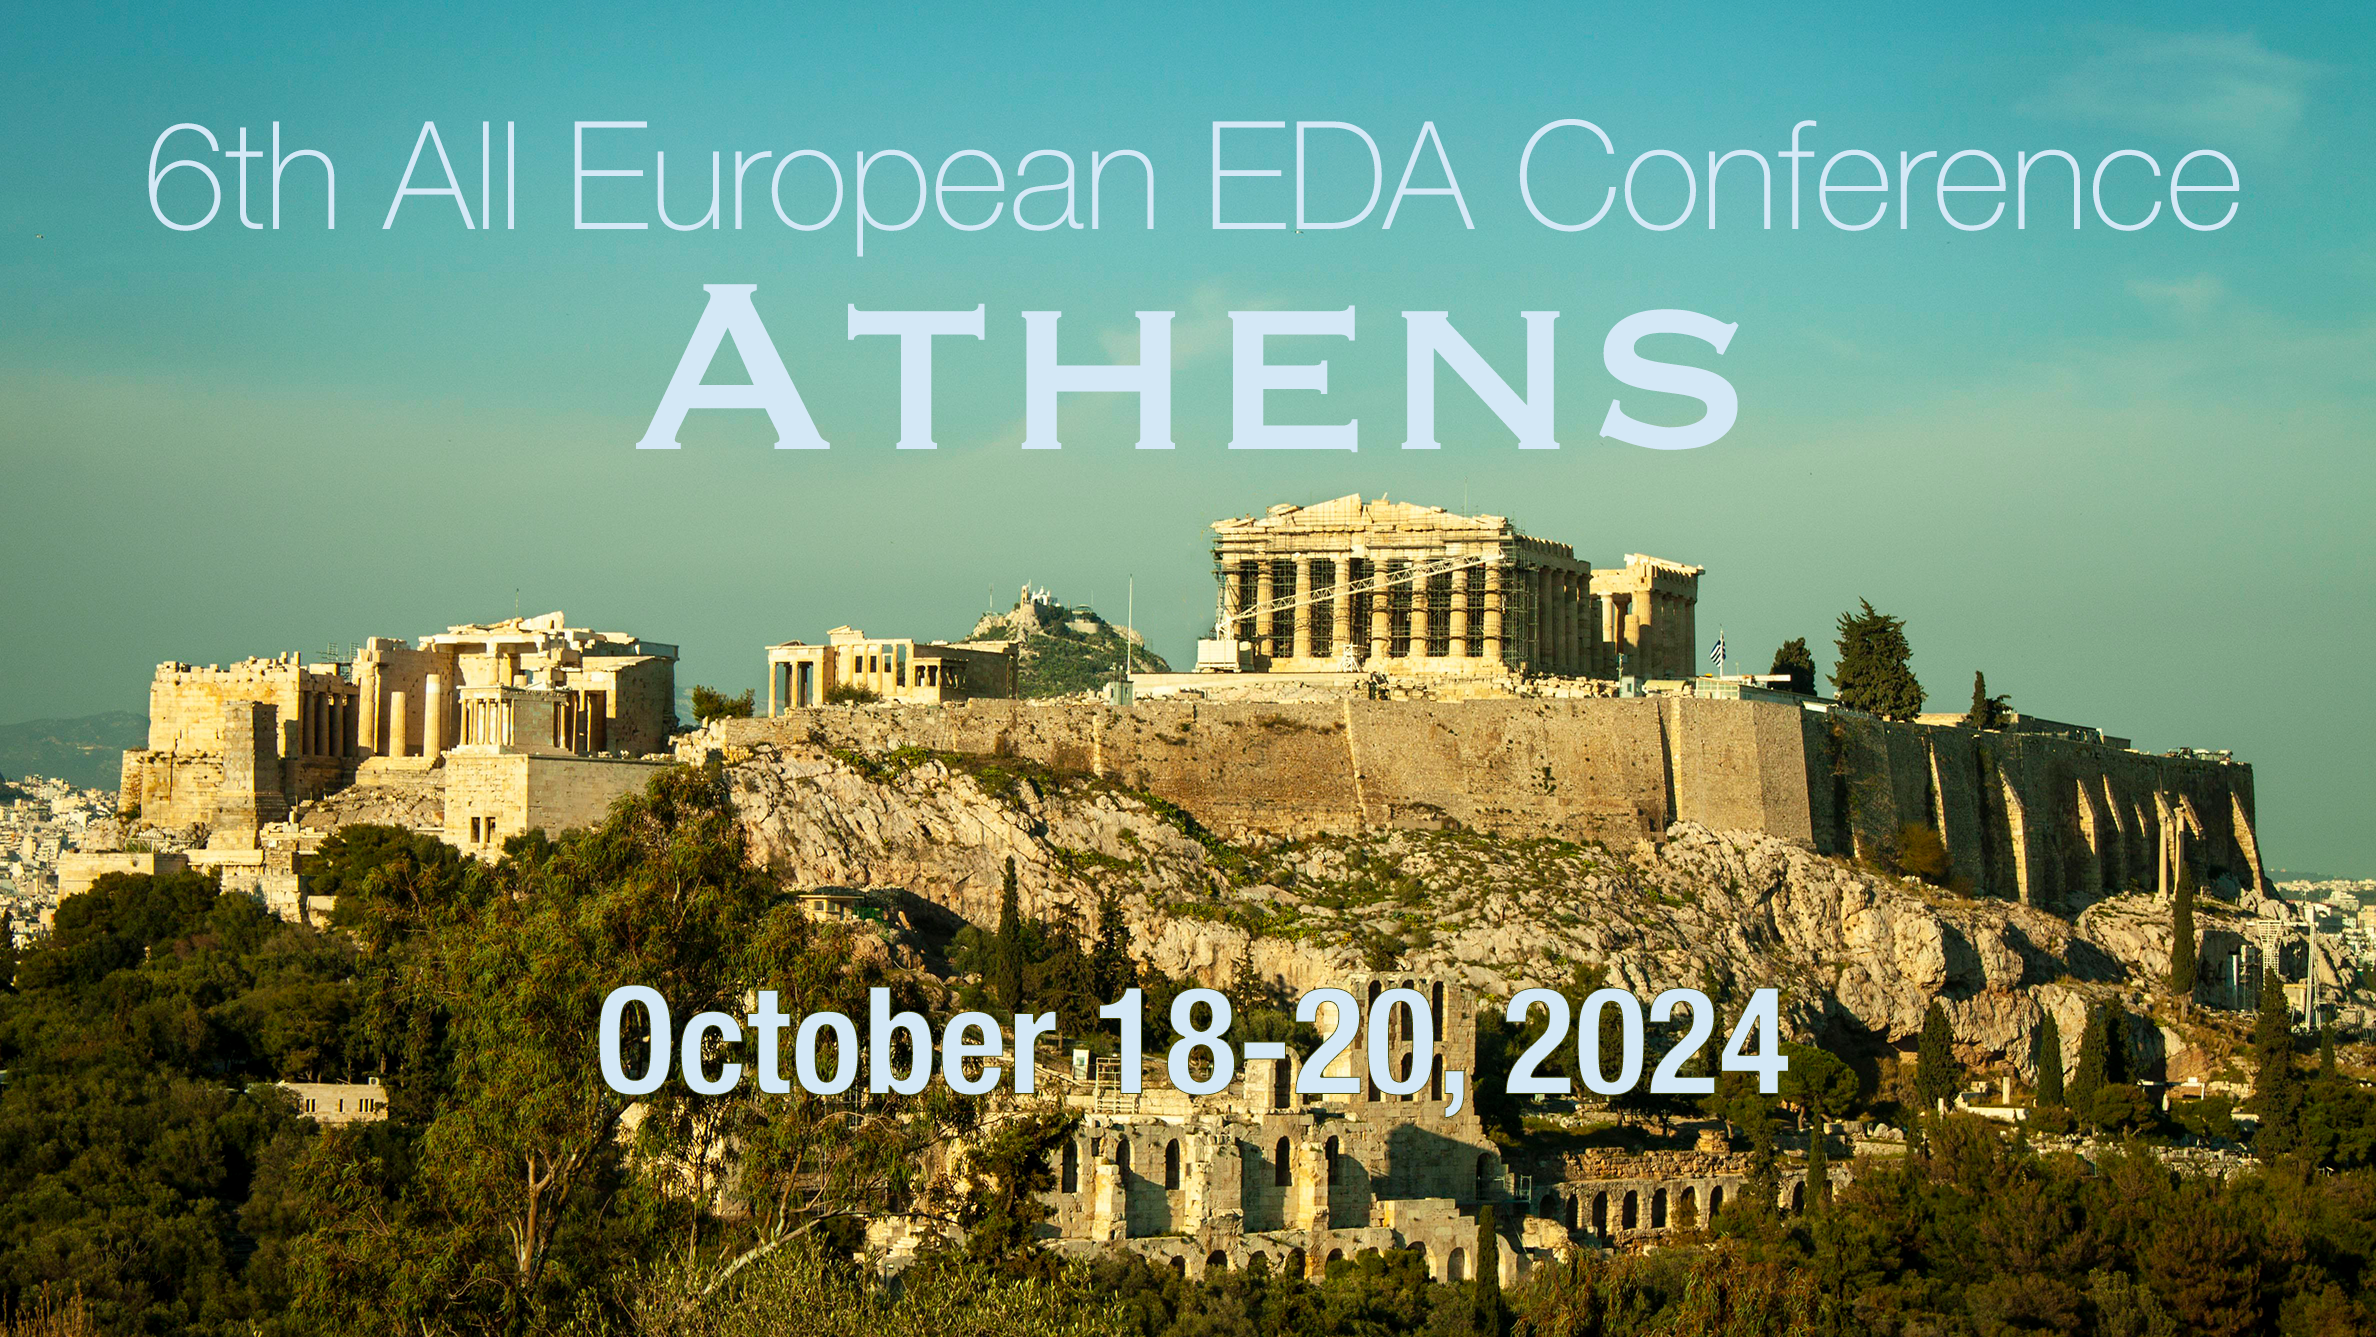 6th All European conference in Athens. October 18-20, 2024